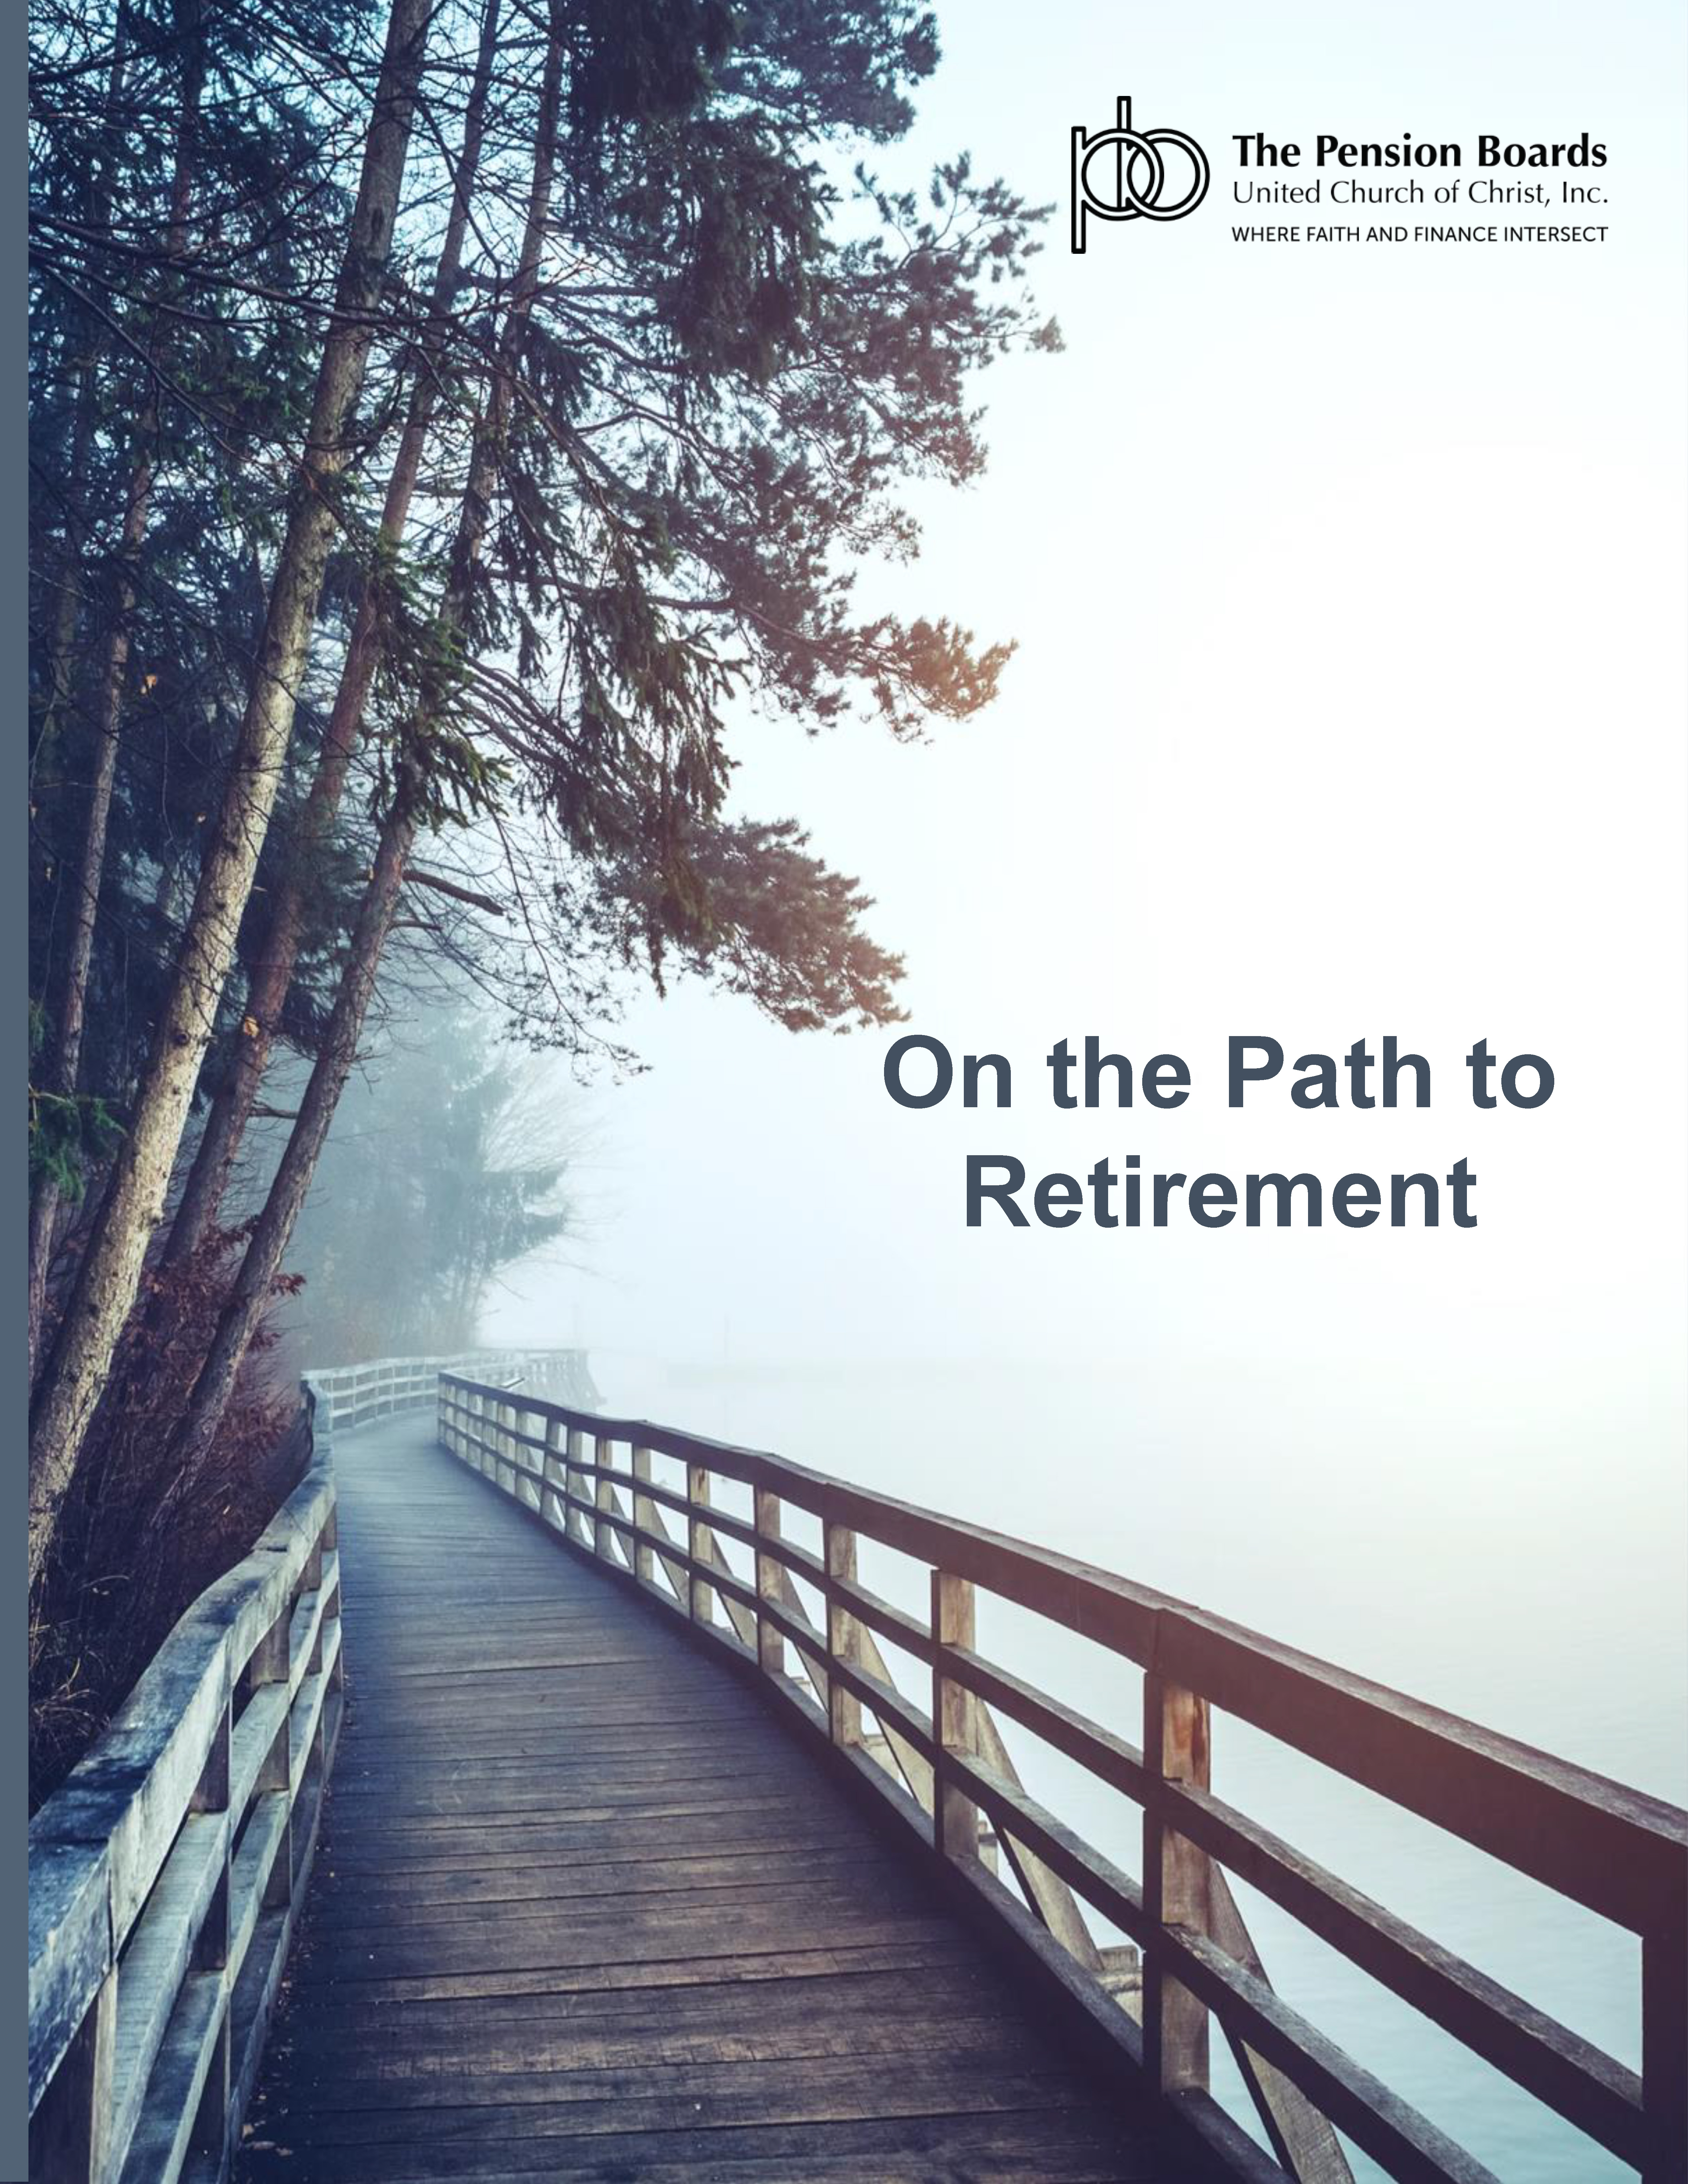 On the Path to Retirement Brochure